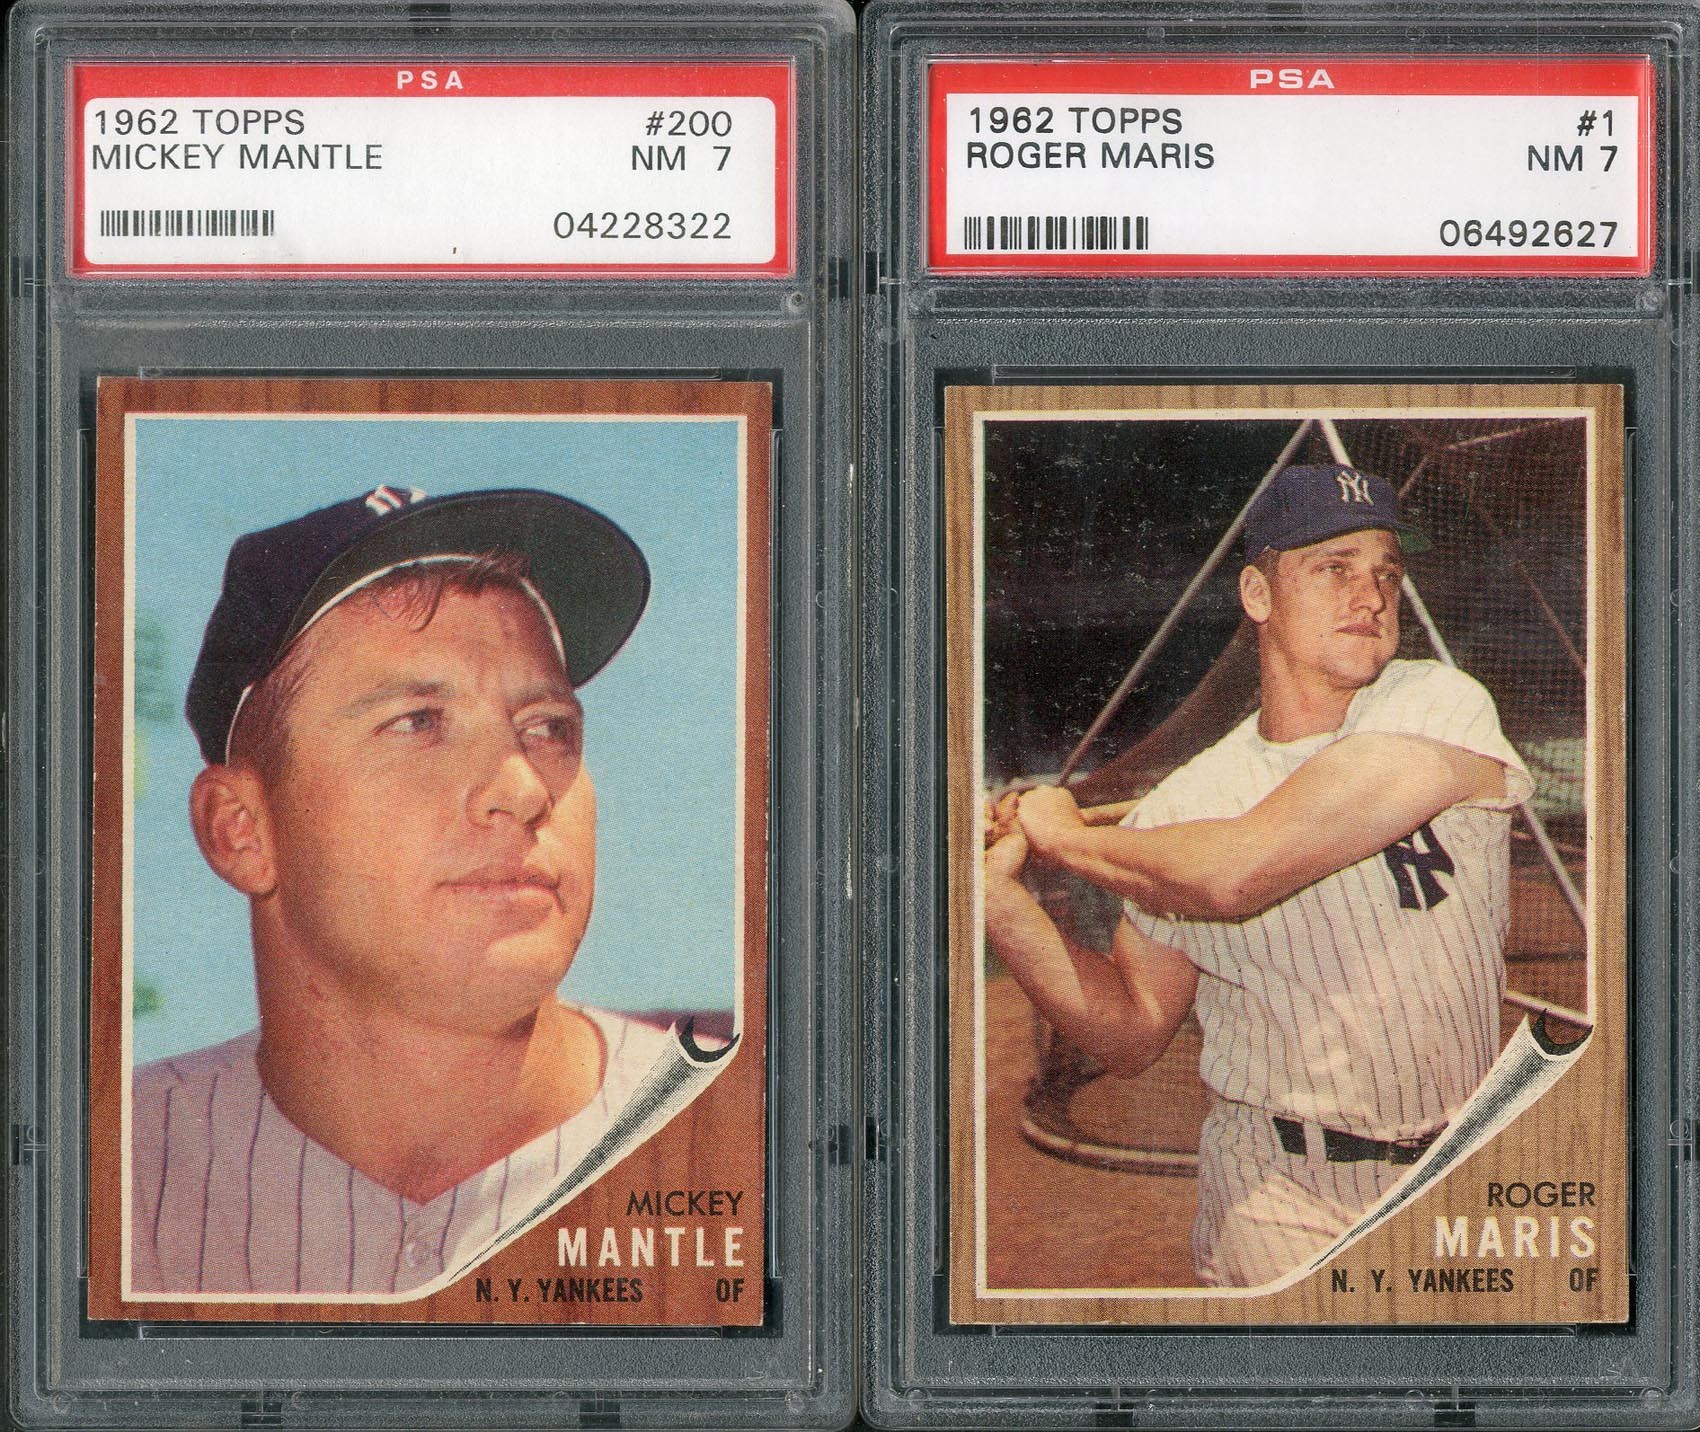 Baseball and Trading Cards - 1962 Topps Mickey Mantle & Roger Maris PSA NM 7's